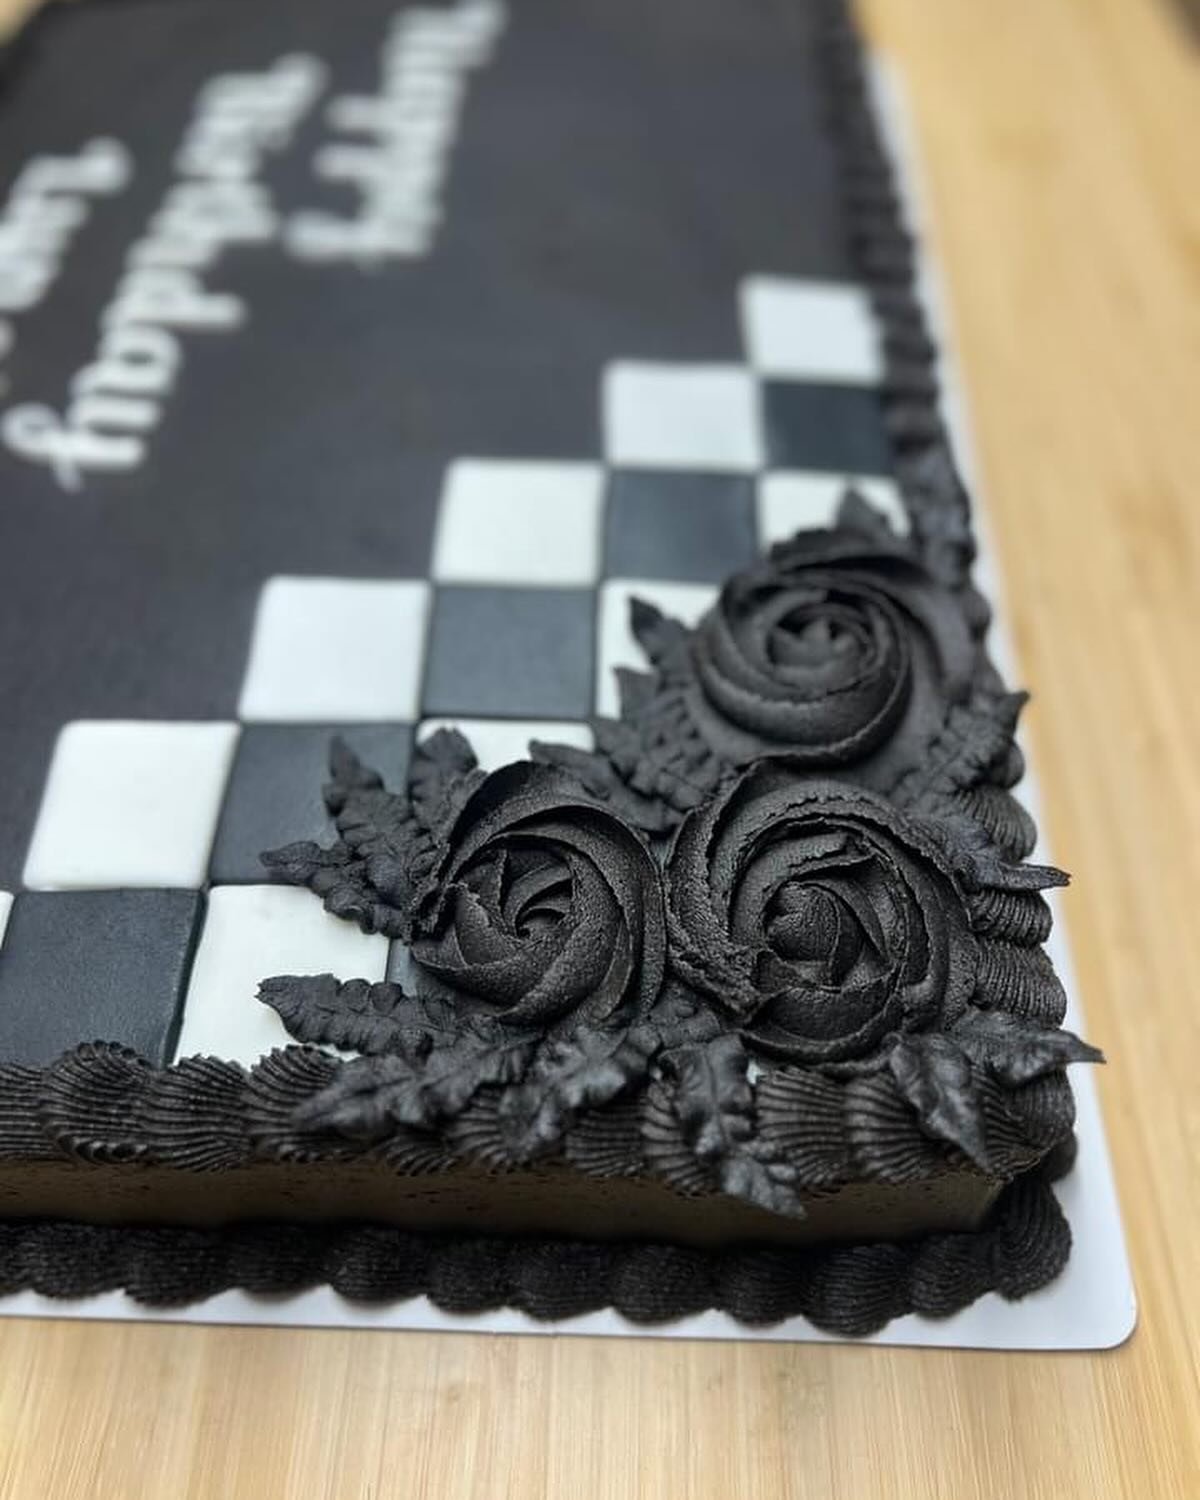 We always love some black roses. There is just something about them!
Message us for all of your cake and cupcake needs!

 #johnsonvillecakes #cakesofwacotexas #cakesofmcgregortexas #birthdaycakesofwaco #cakesofmcgregor #wacocakes #cakesofwaco #blackr